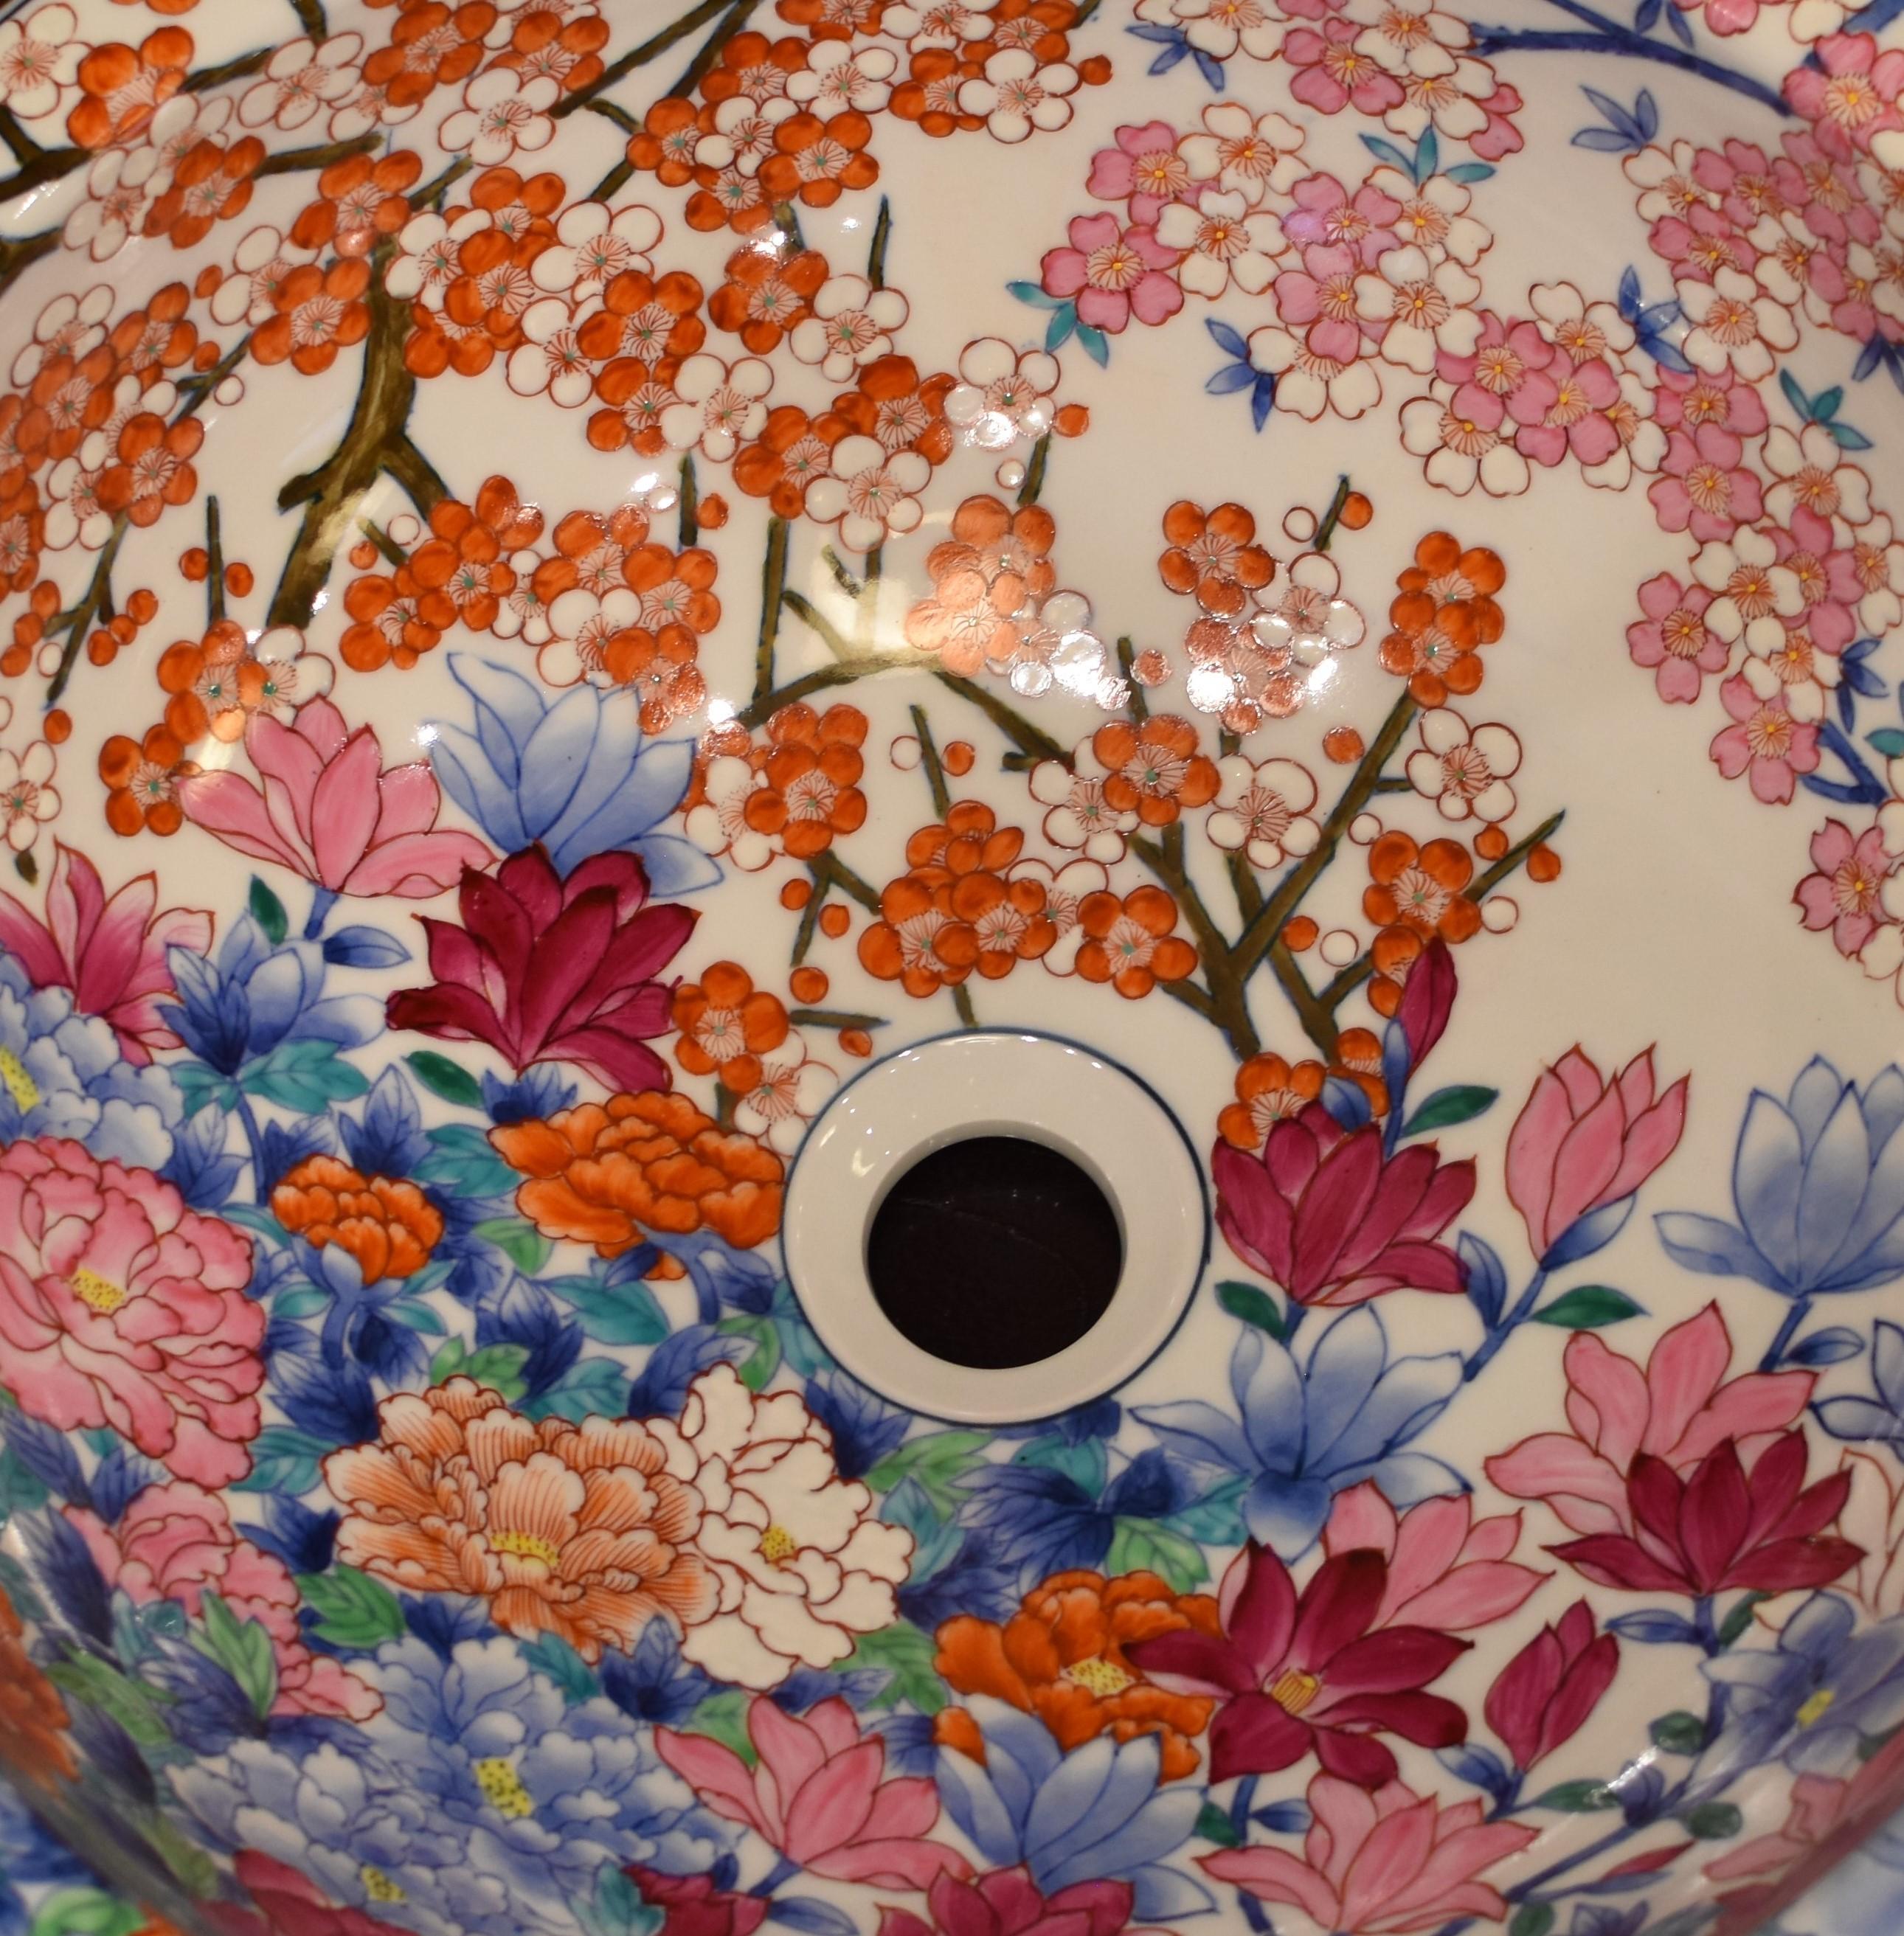 Unique Japanese, handcrafted, hand-painted porcelain washbasin by highly an acclaimed award-winning master porcelain artist from the Imari-Arita region in Japan.
The outer surface of this magnificent washbasin is pure white. If you are looking for